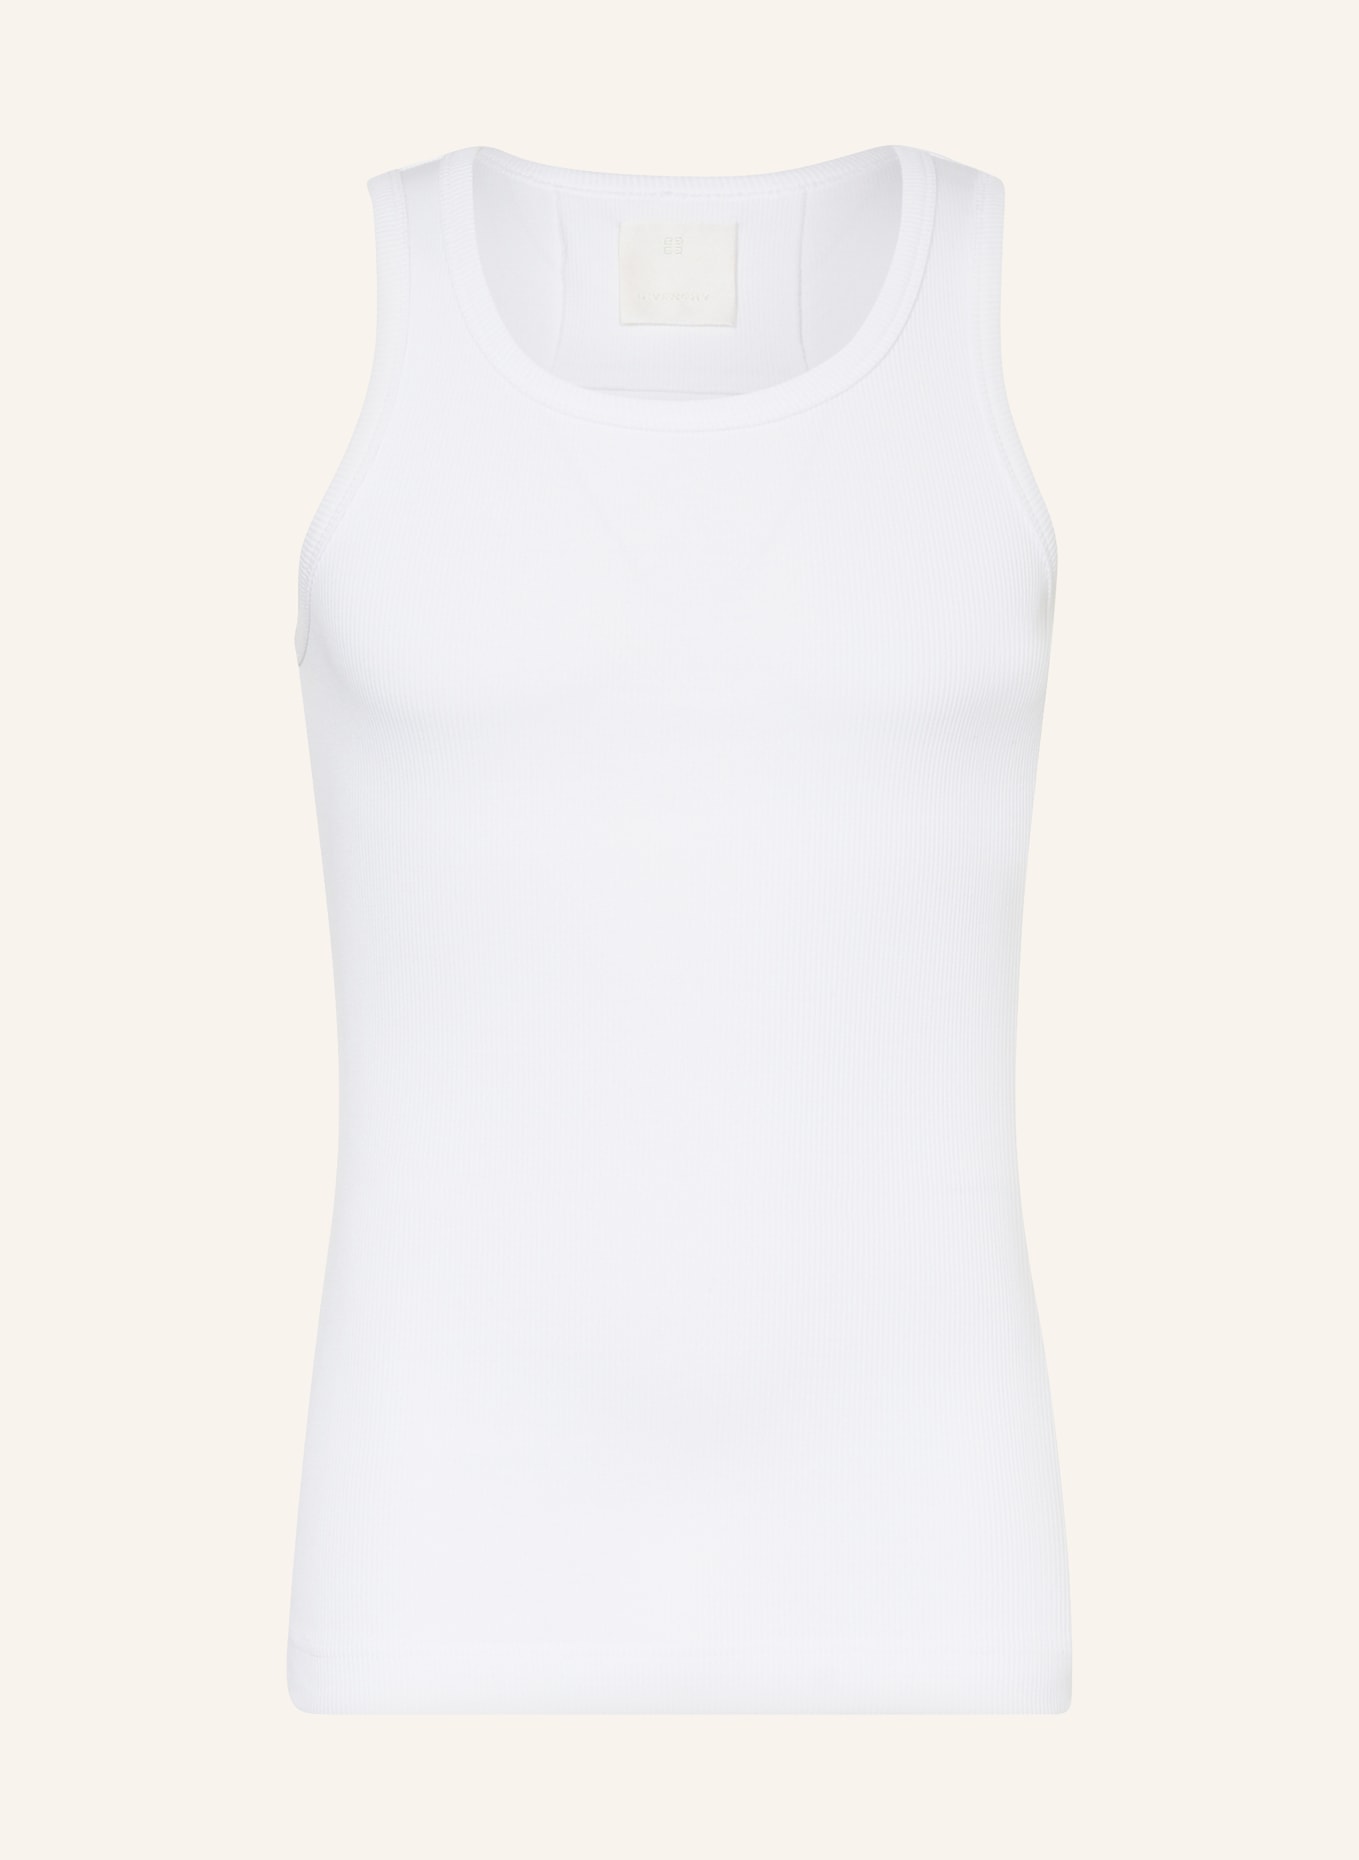 GIVENCHY Tanktop, Farbe: WEISS (Bild 1)